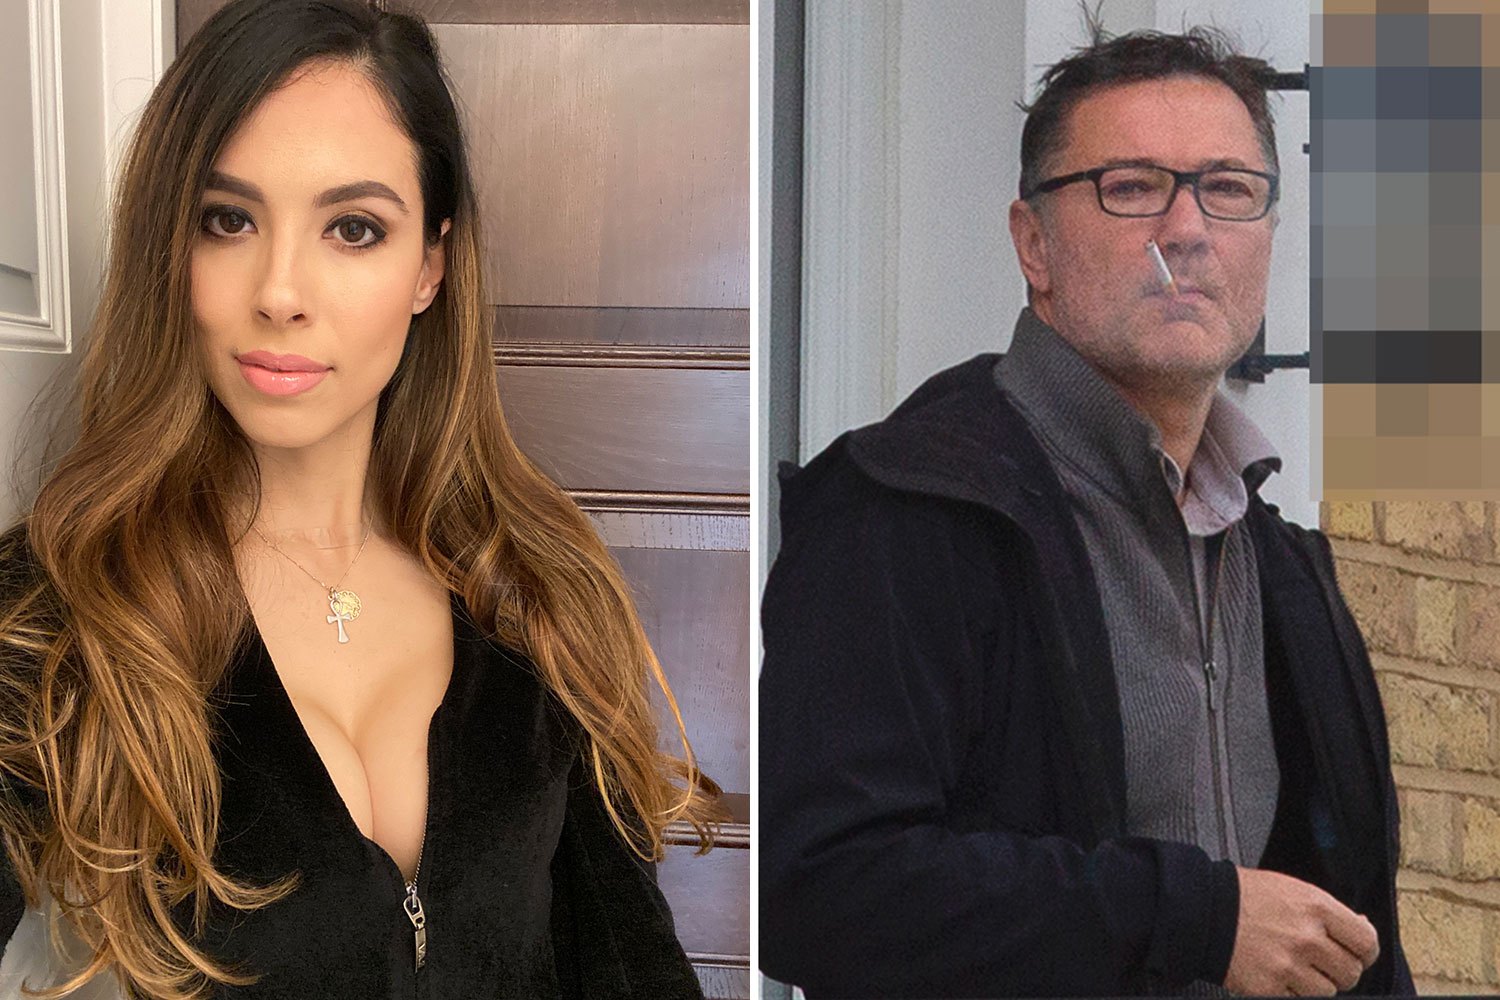 Pornhub tycoon's model wife calls for billionaire to cut ties with